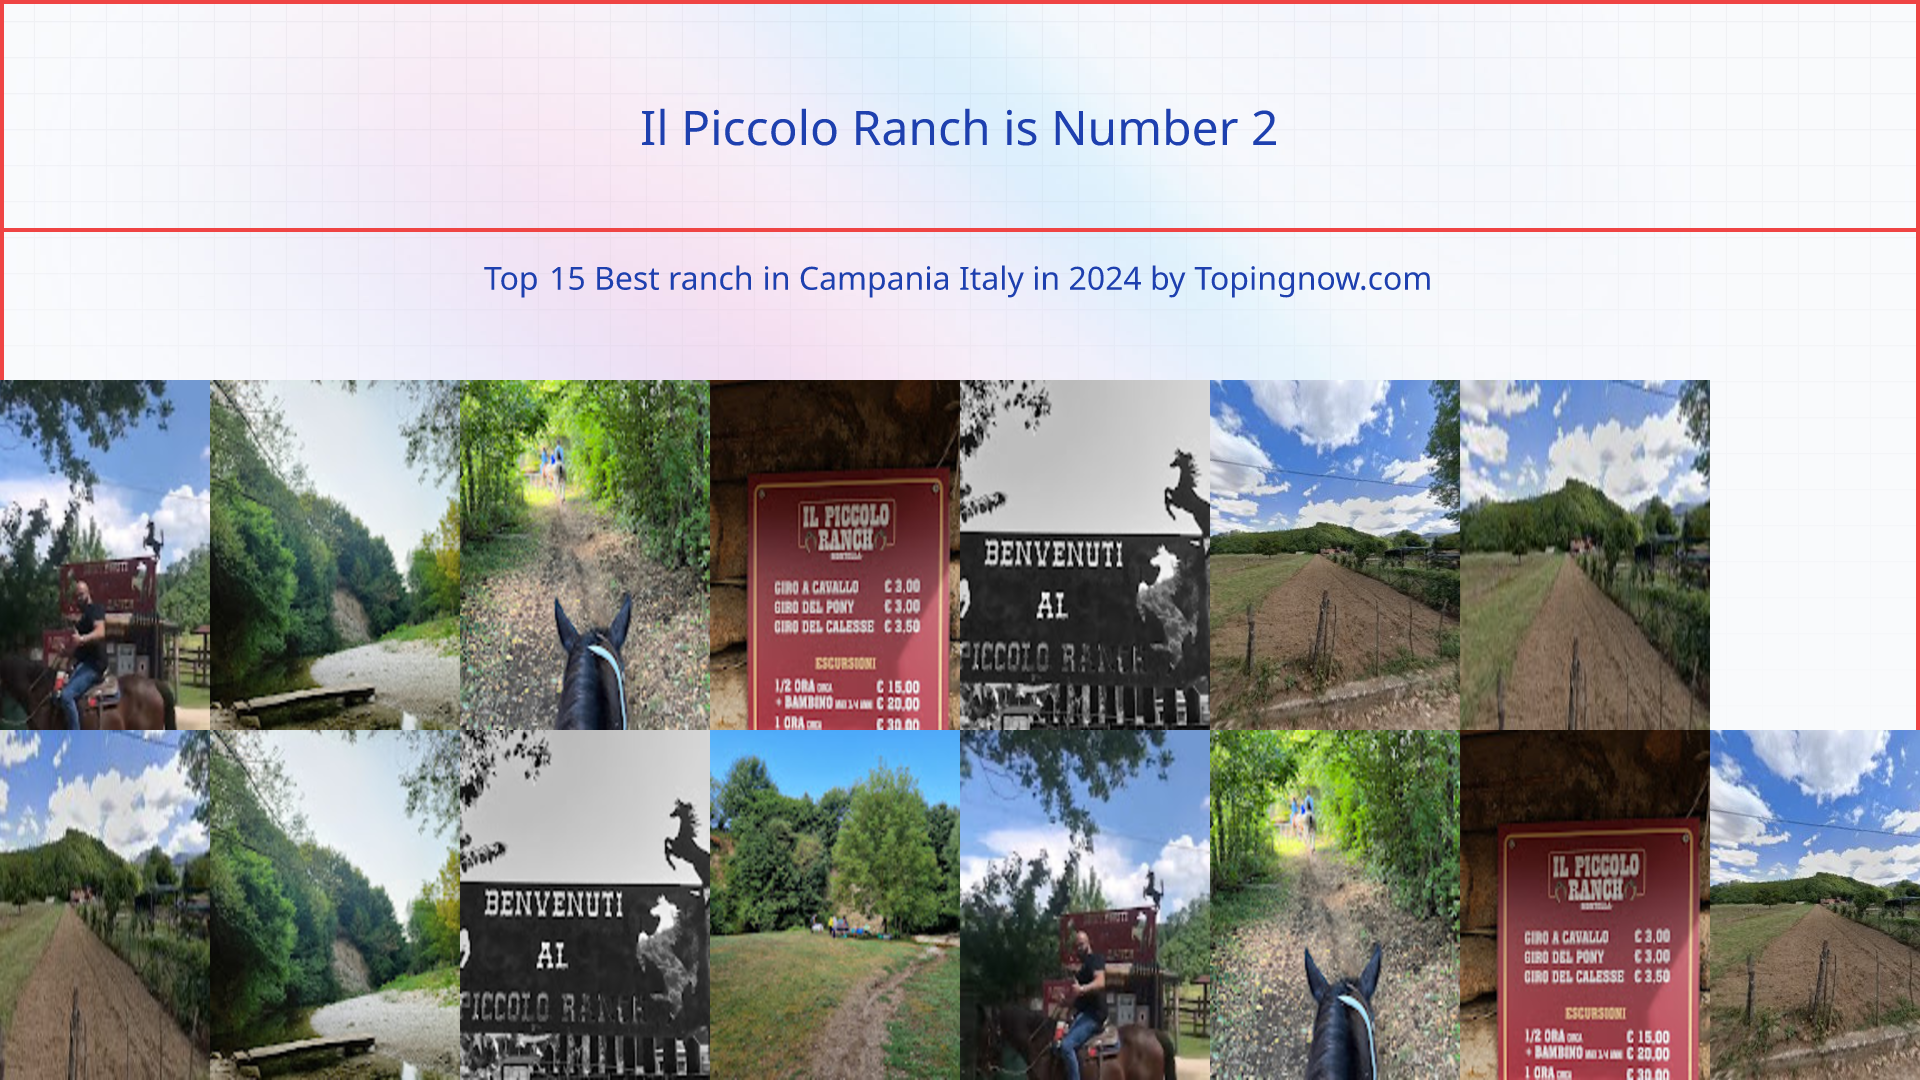 Il Piccolo Ranch: Top 15 Best ranch in Campania Italy in 2024